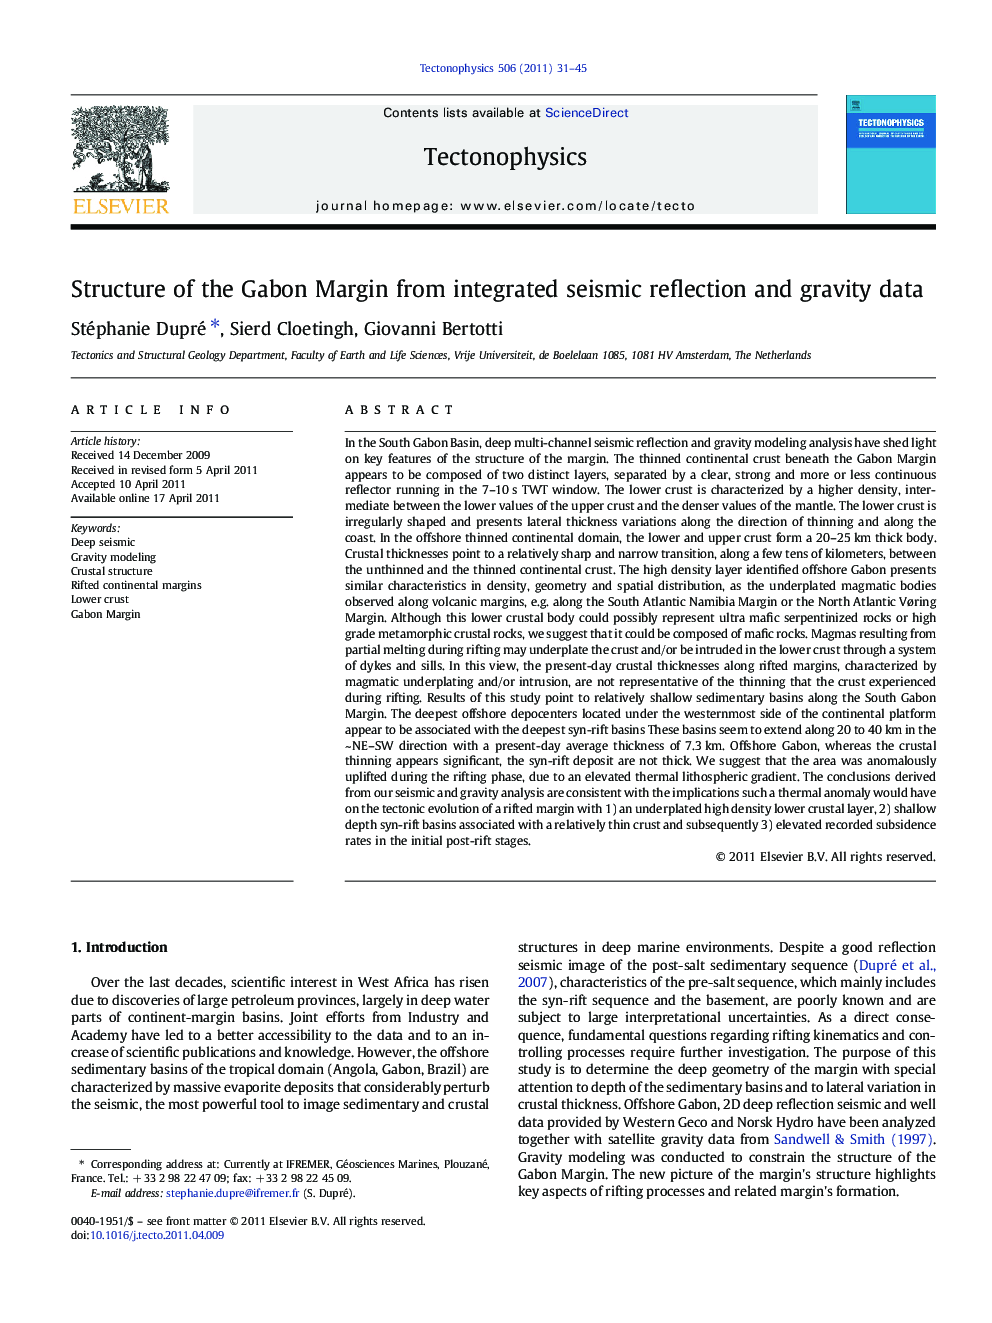 Structure of the Gabon Margin from integrated seismic reflection and gravity data